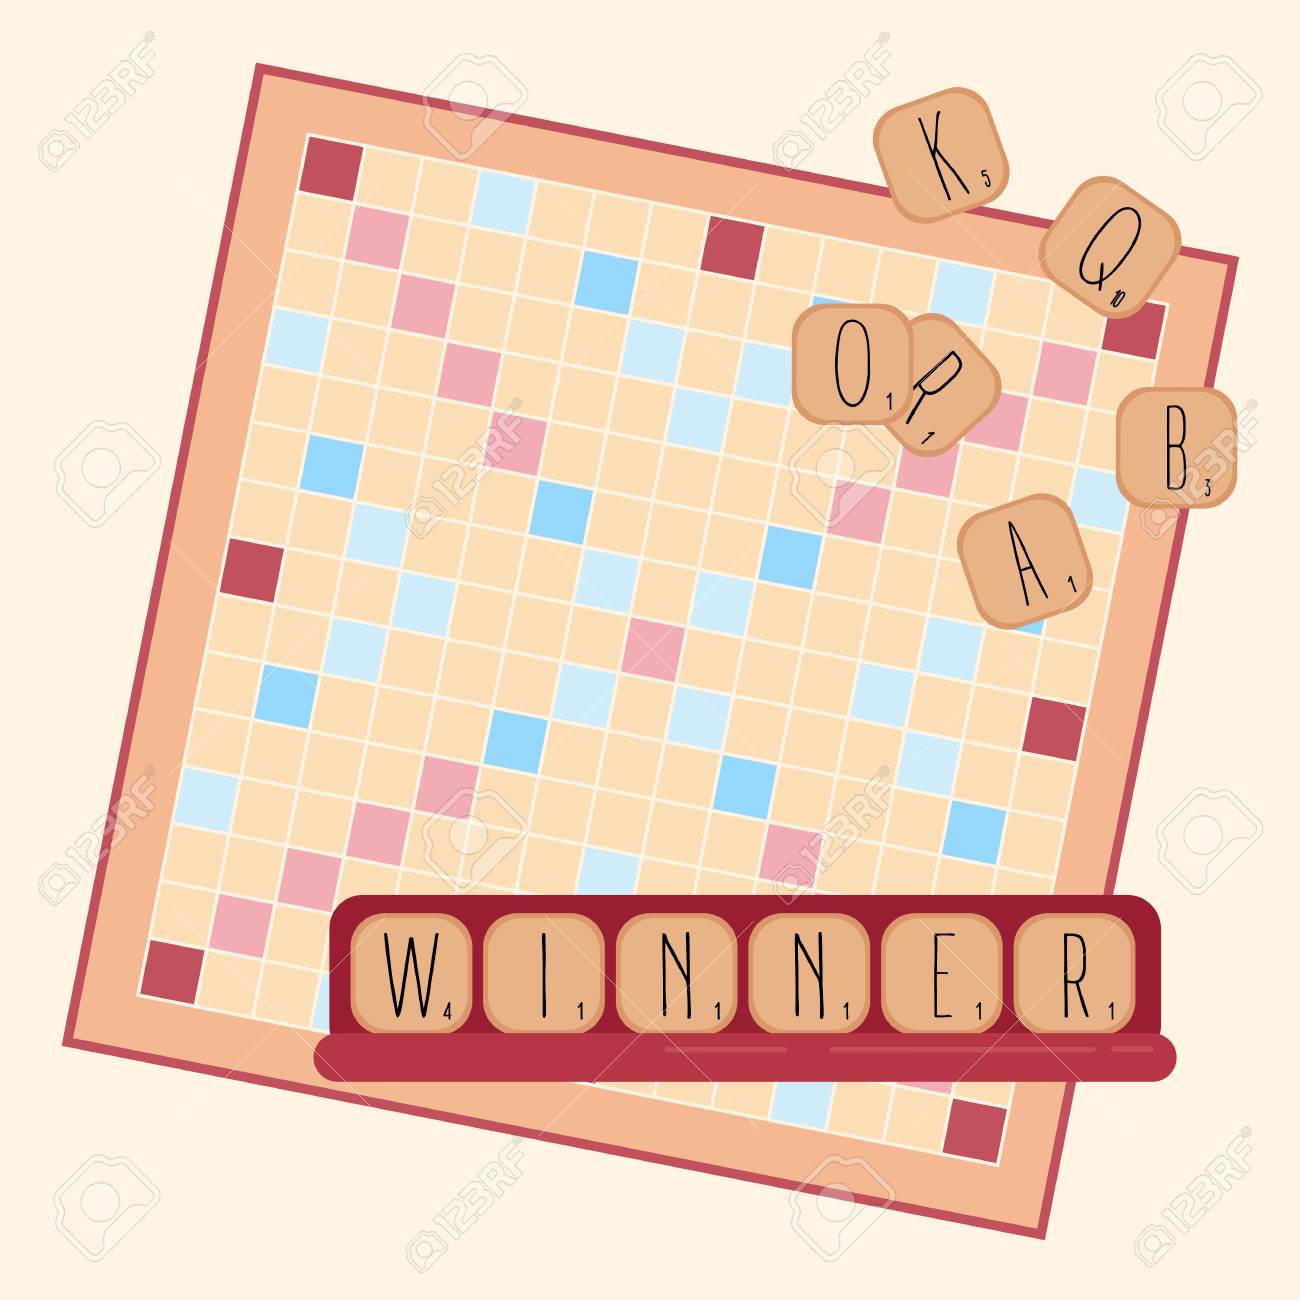 Board free game adult